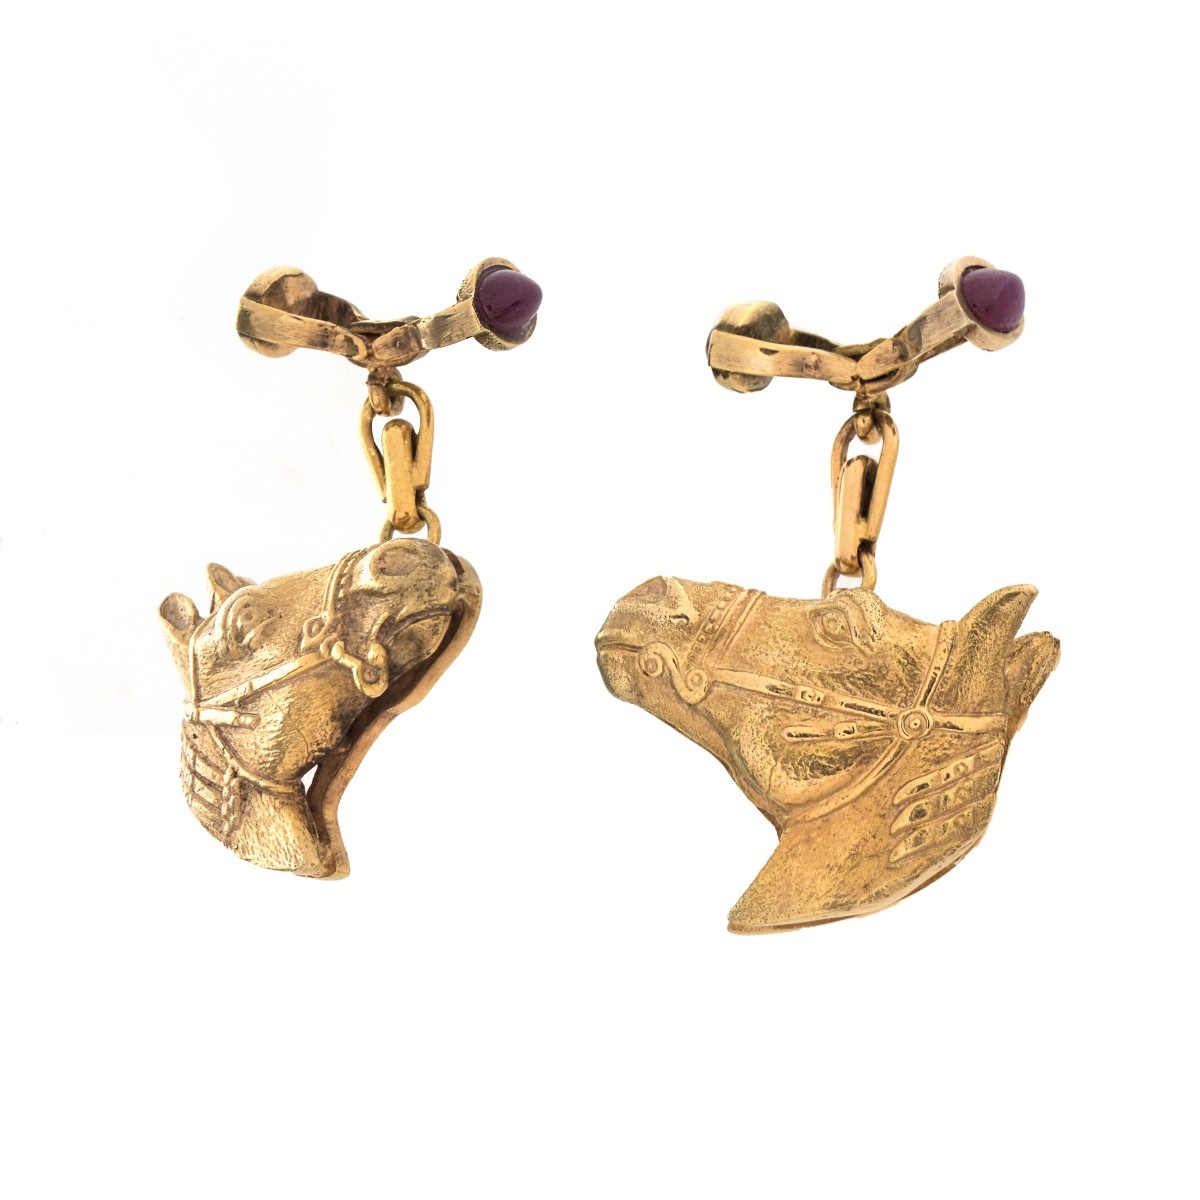 Russian Faberge 14K and Ruby Cufflinks